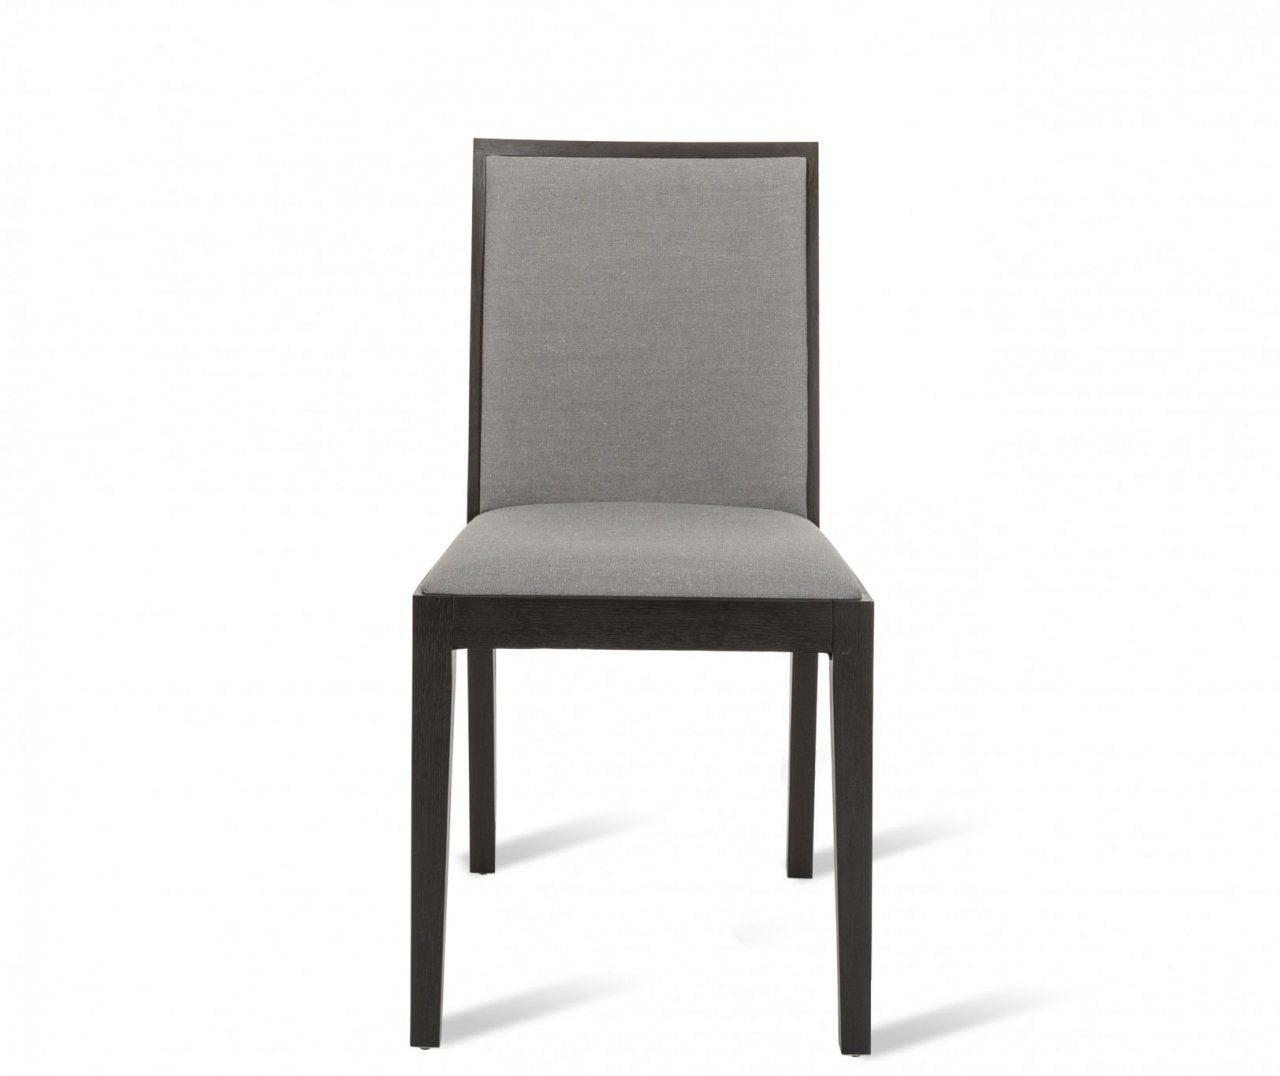 Lotus Dining Chair (2 Chairs)